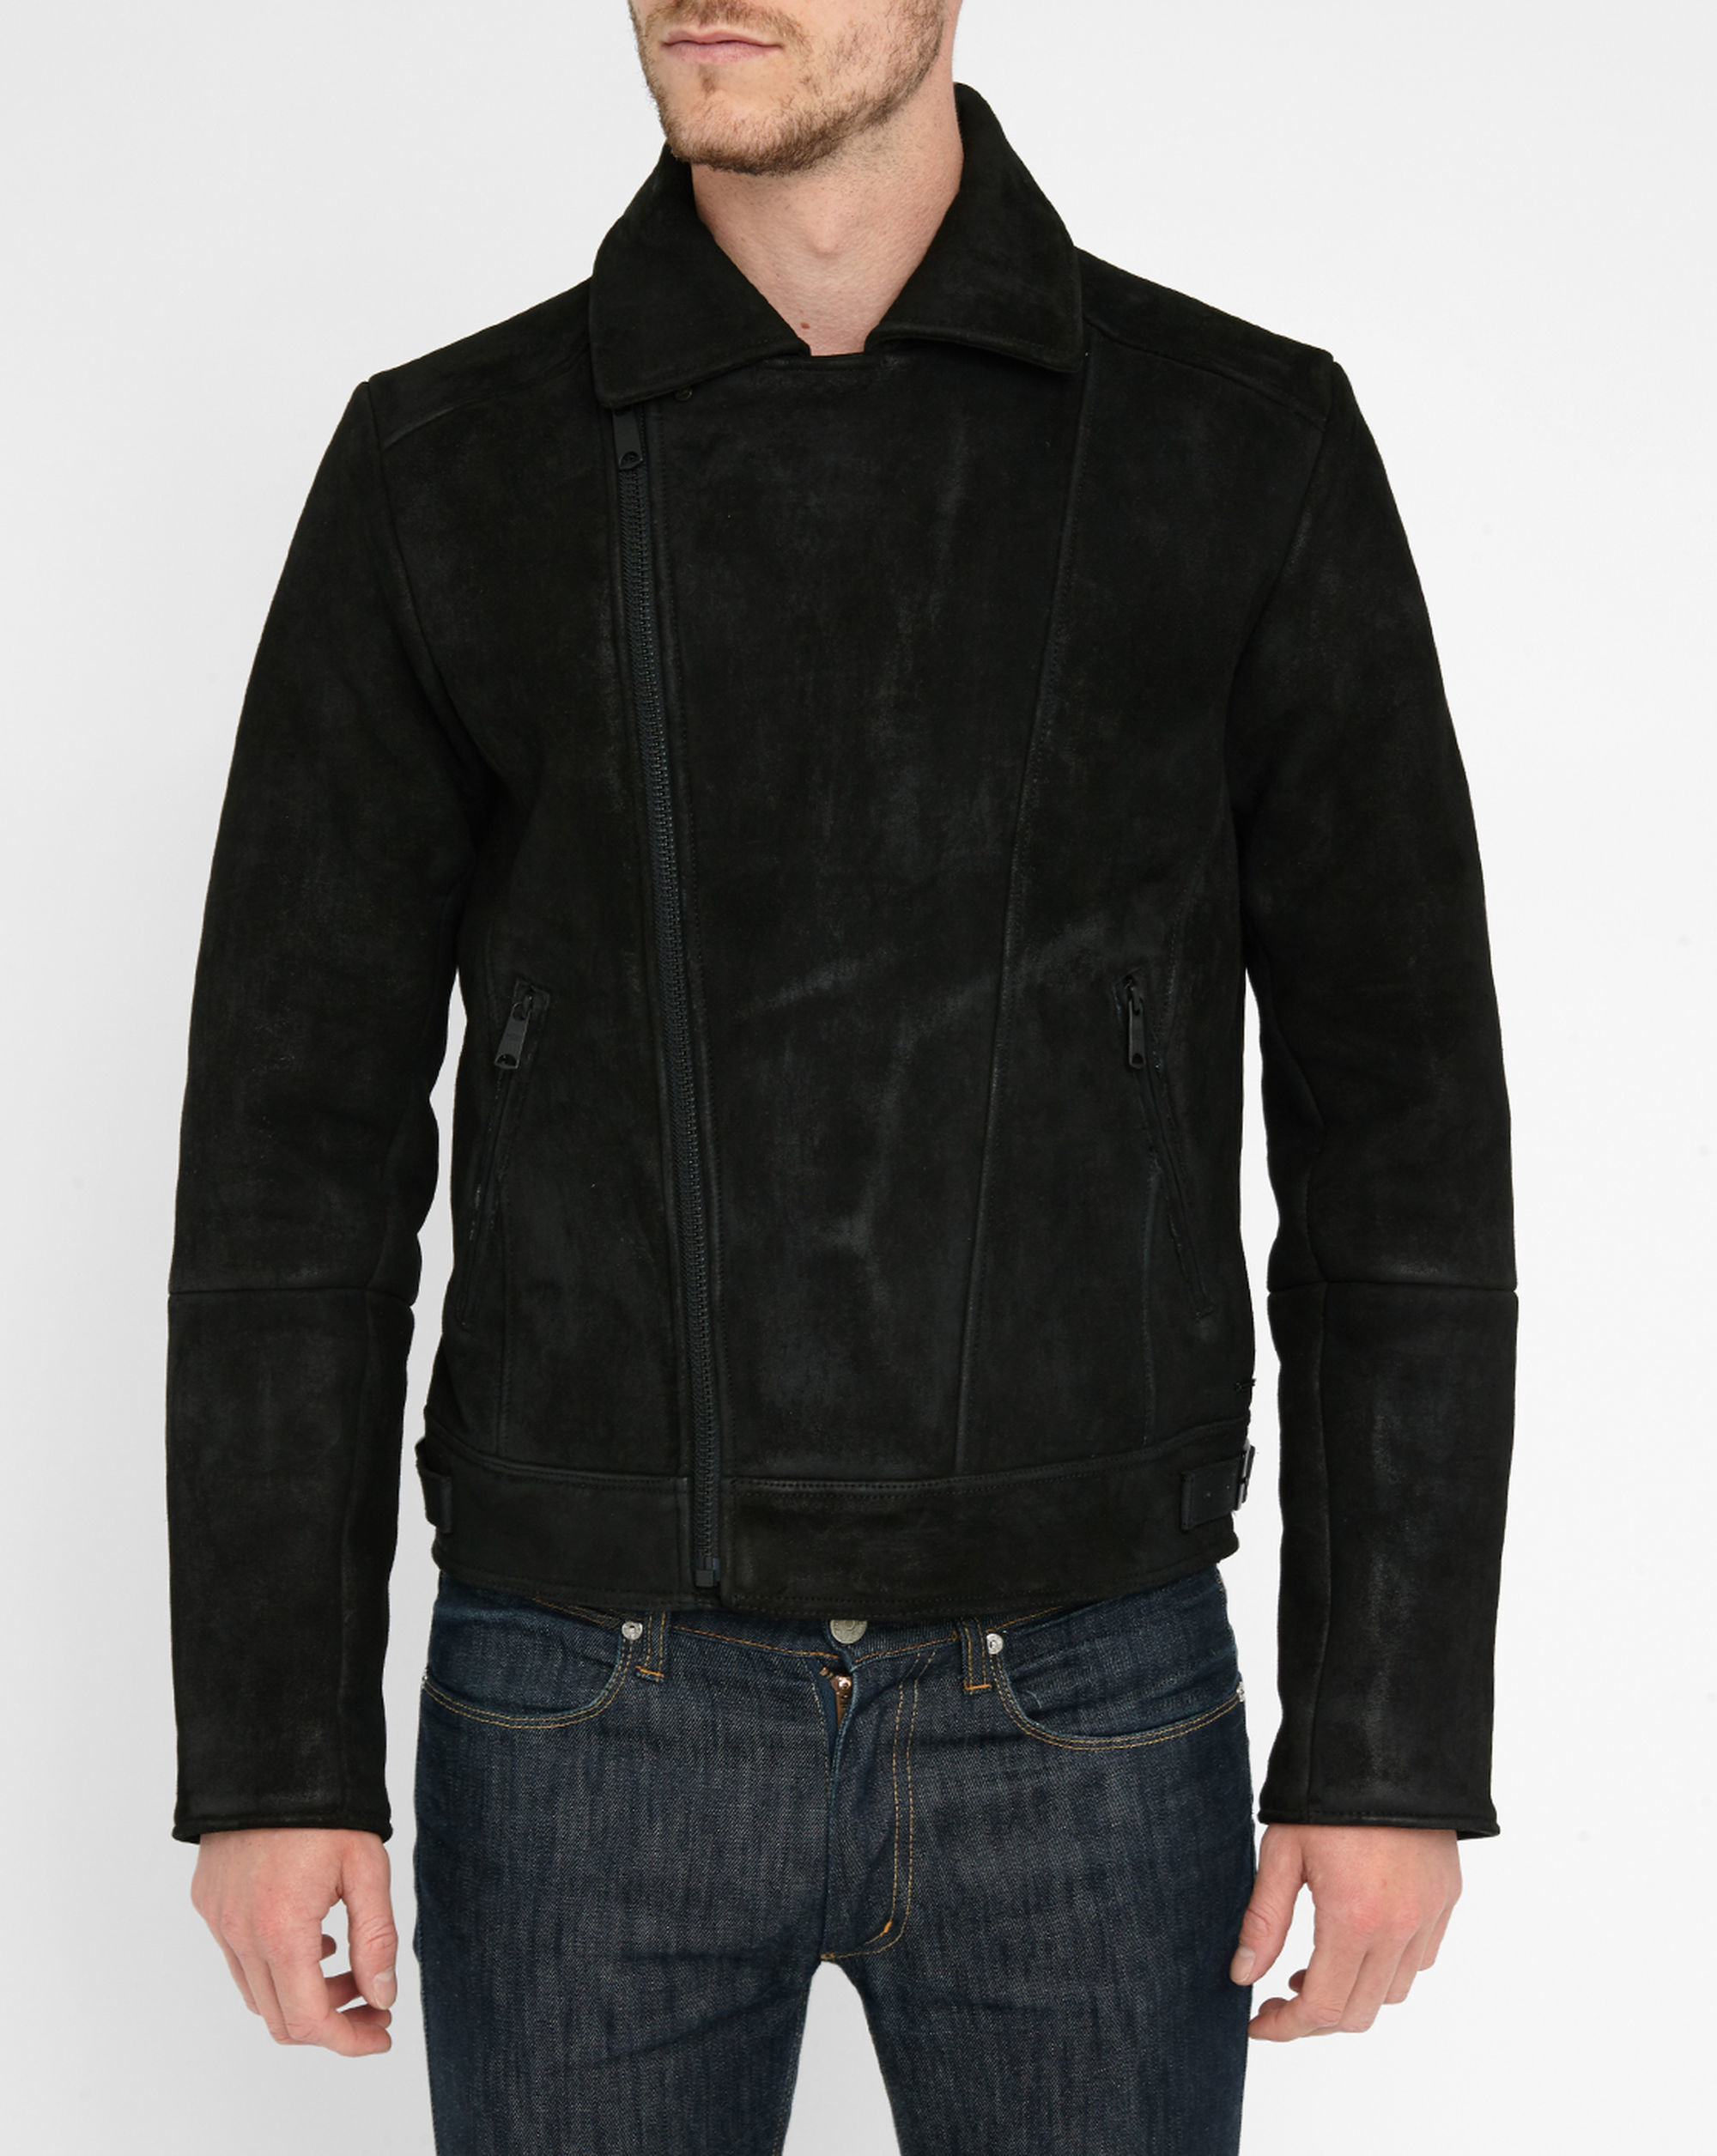 Scotch & soda Black Burnished Leather Biker Jacket With Wool Lining in ...